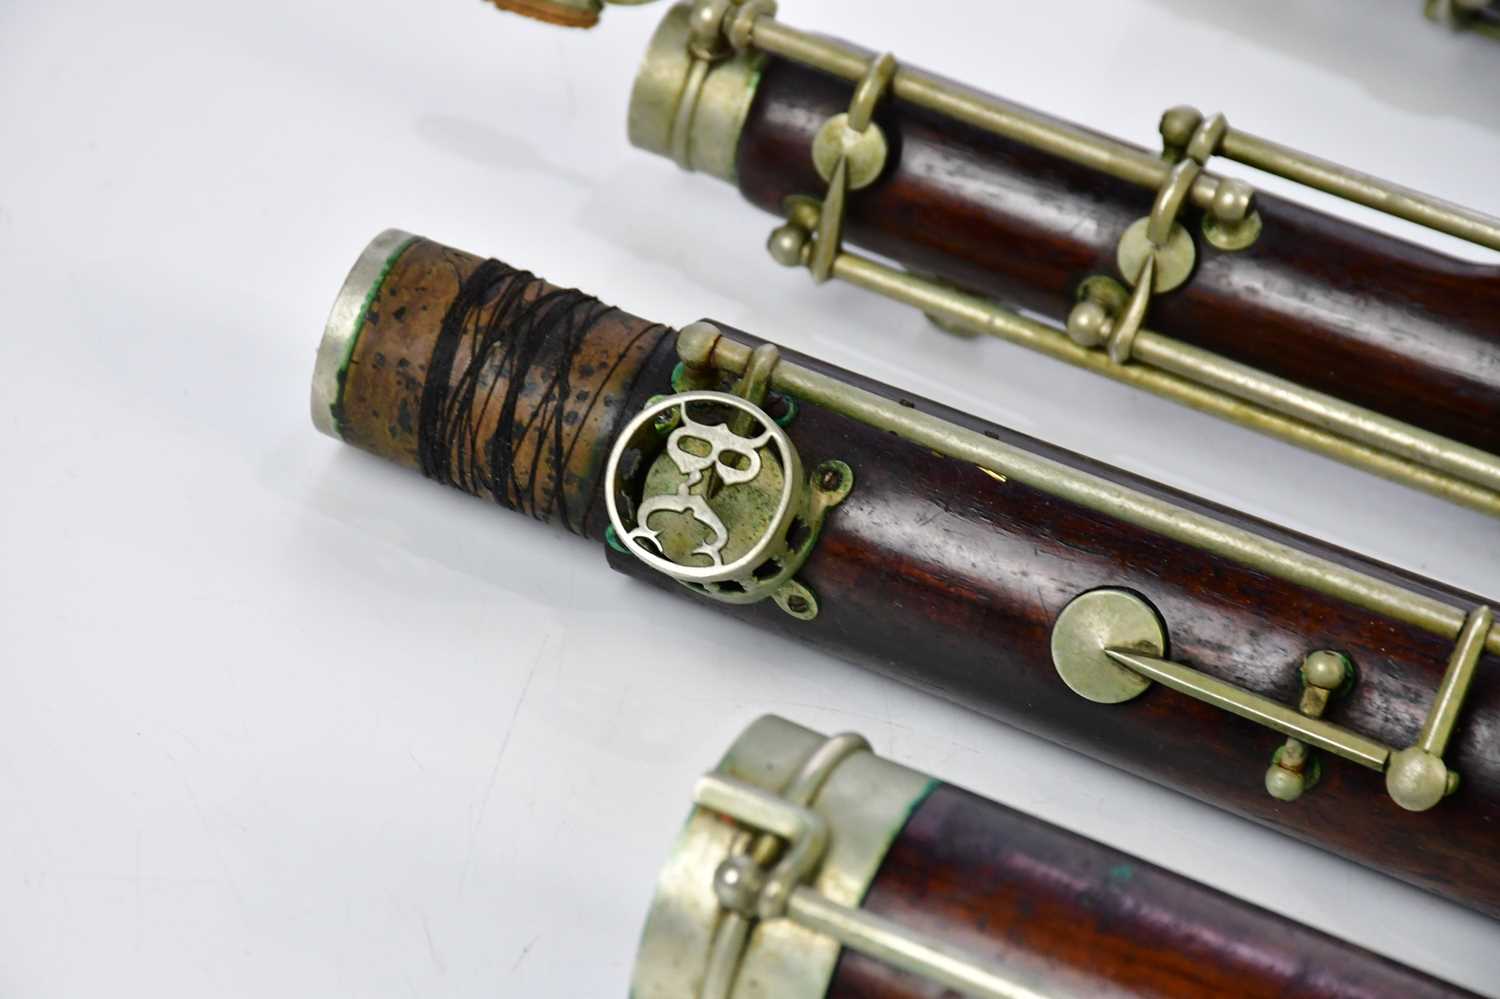 BUFFET CRAMPON, PARIS; a late 19th/early 20th century rosewood bassoon with nickel mounts, cased. - Image 2 of 4